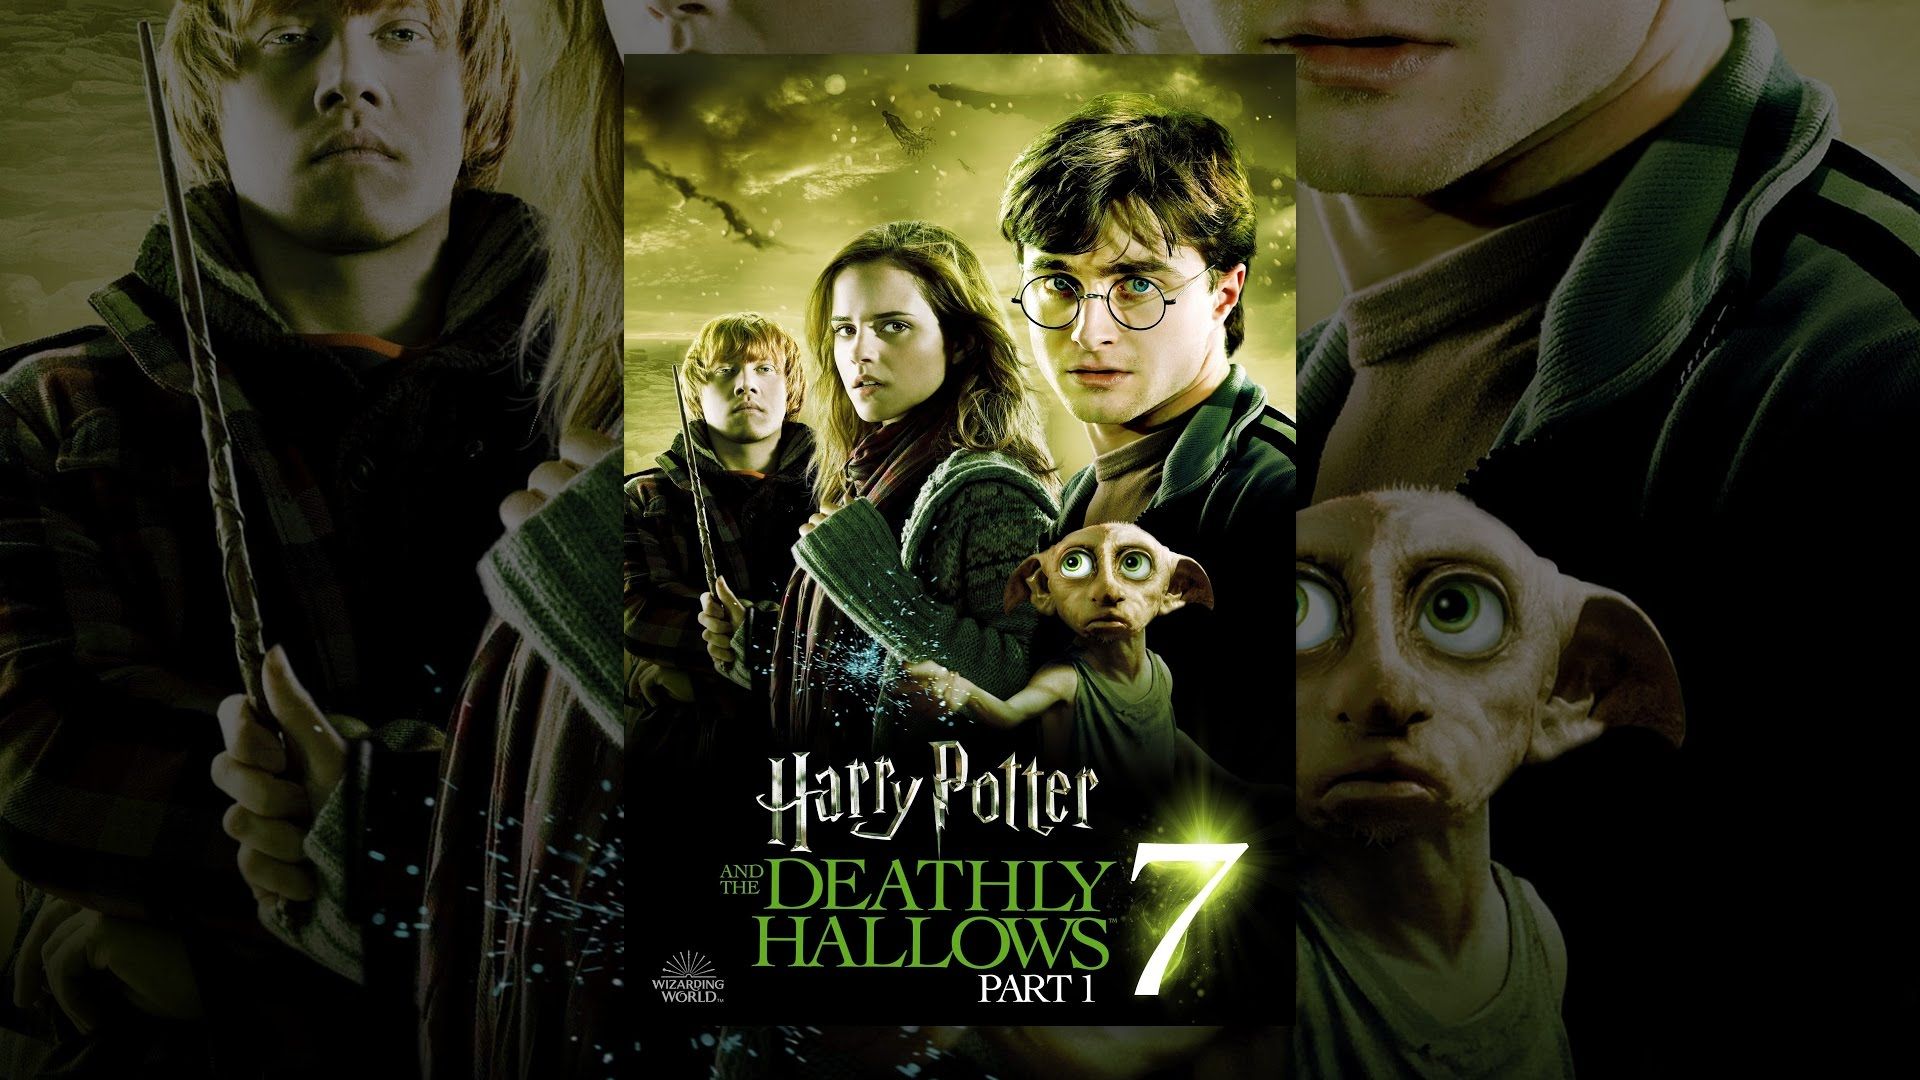 Harry Potter and the Deathly Hallows instal the new for windows